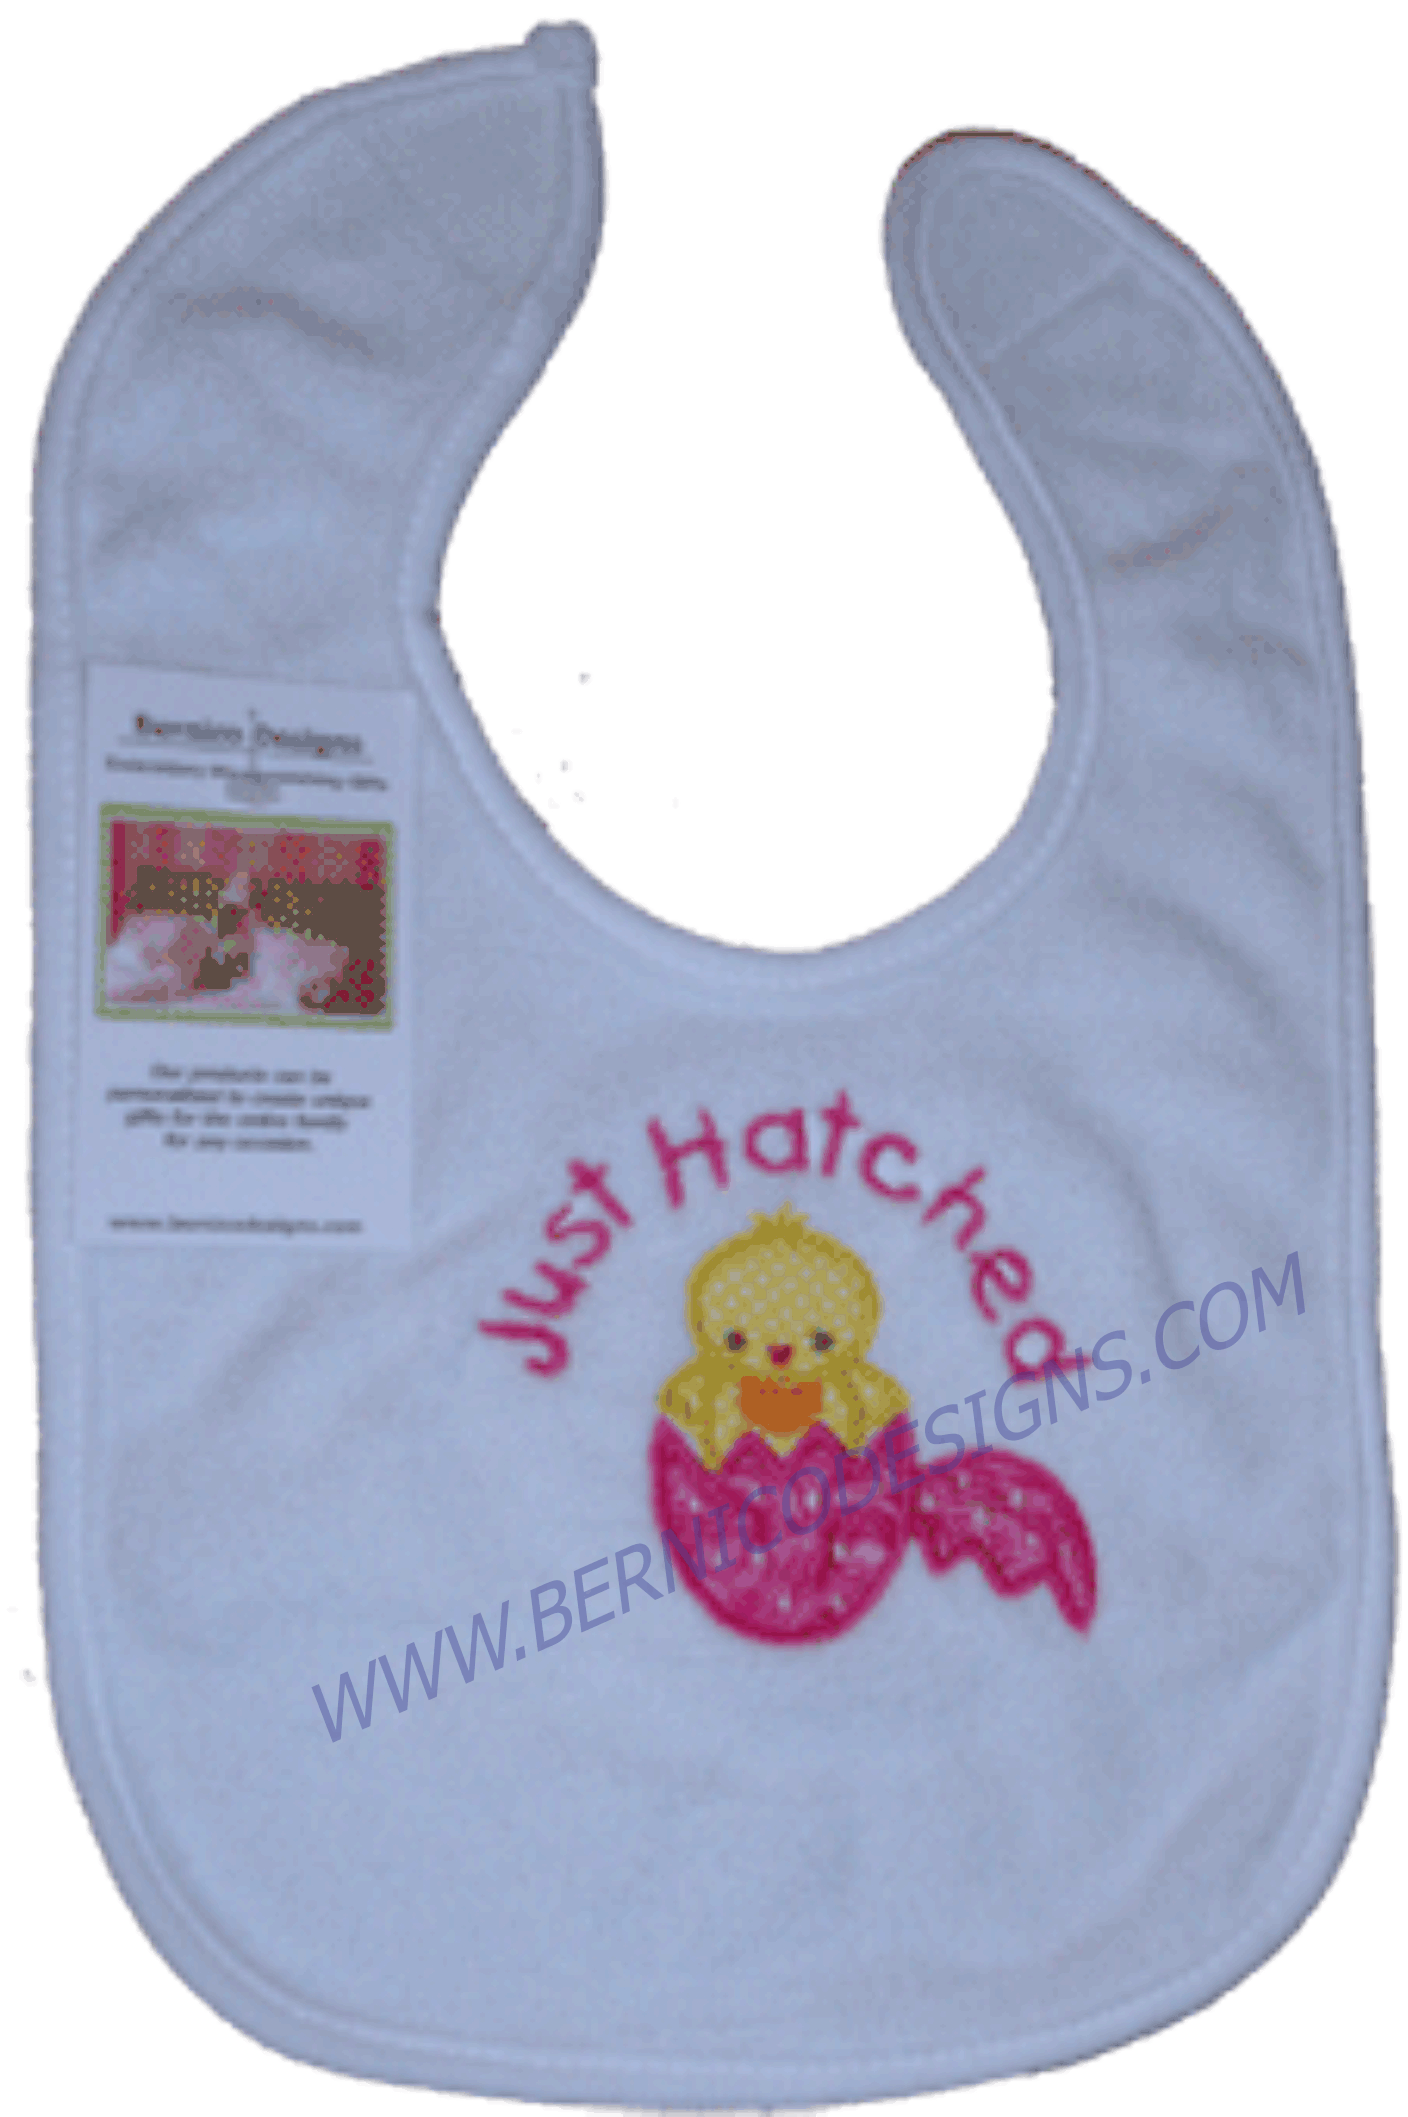 Bib - Personalized Custom and Monogrammed Bib for Baby Girl-Just Hatched #B16